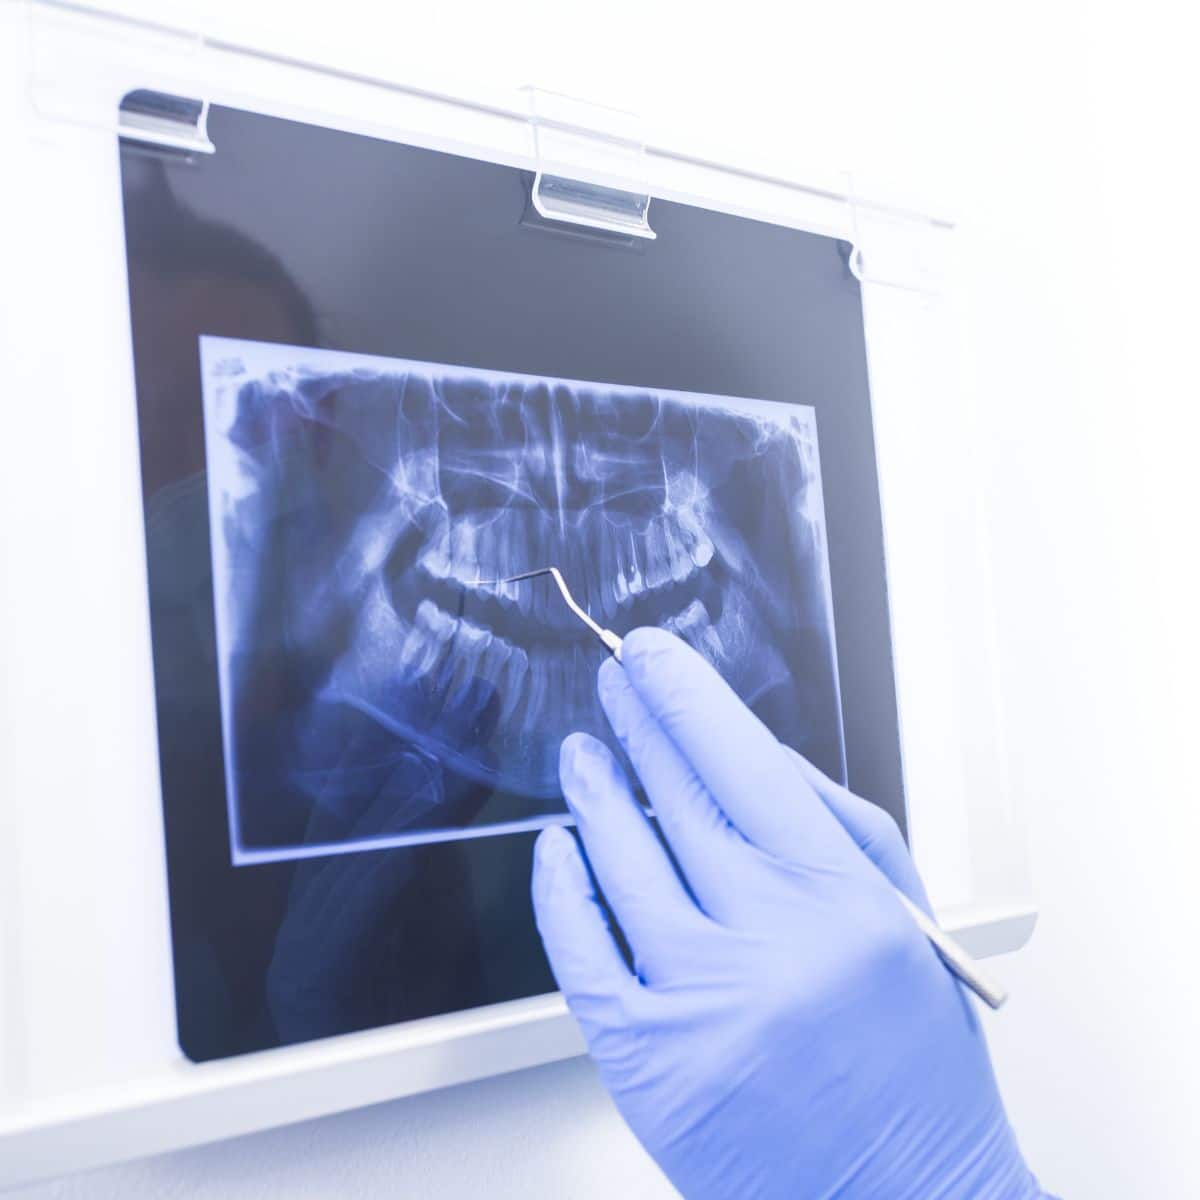 Dentist reviewing a patient's dental xray